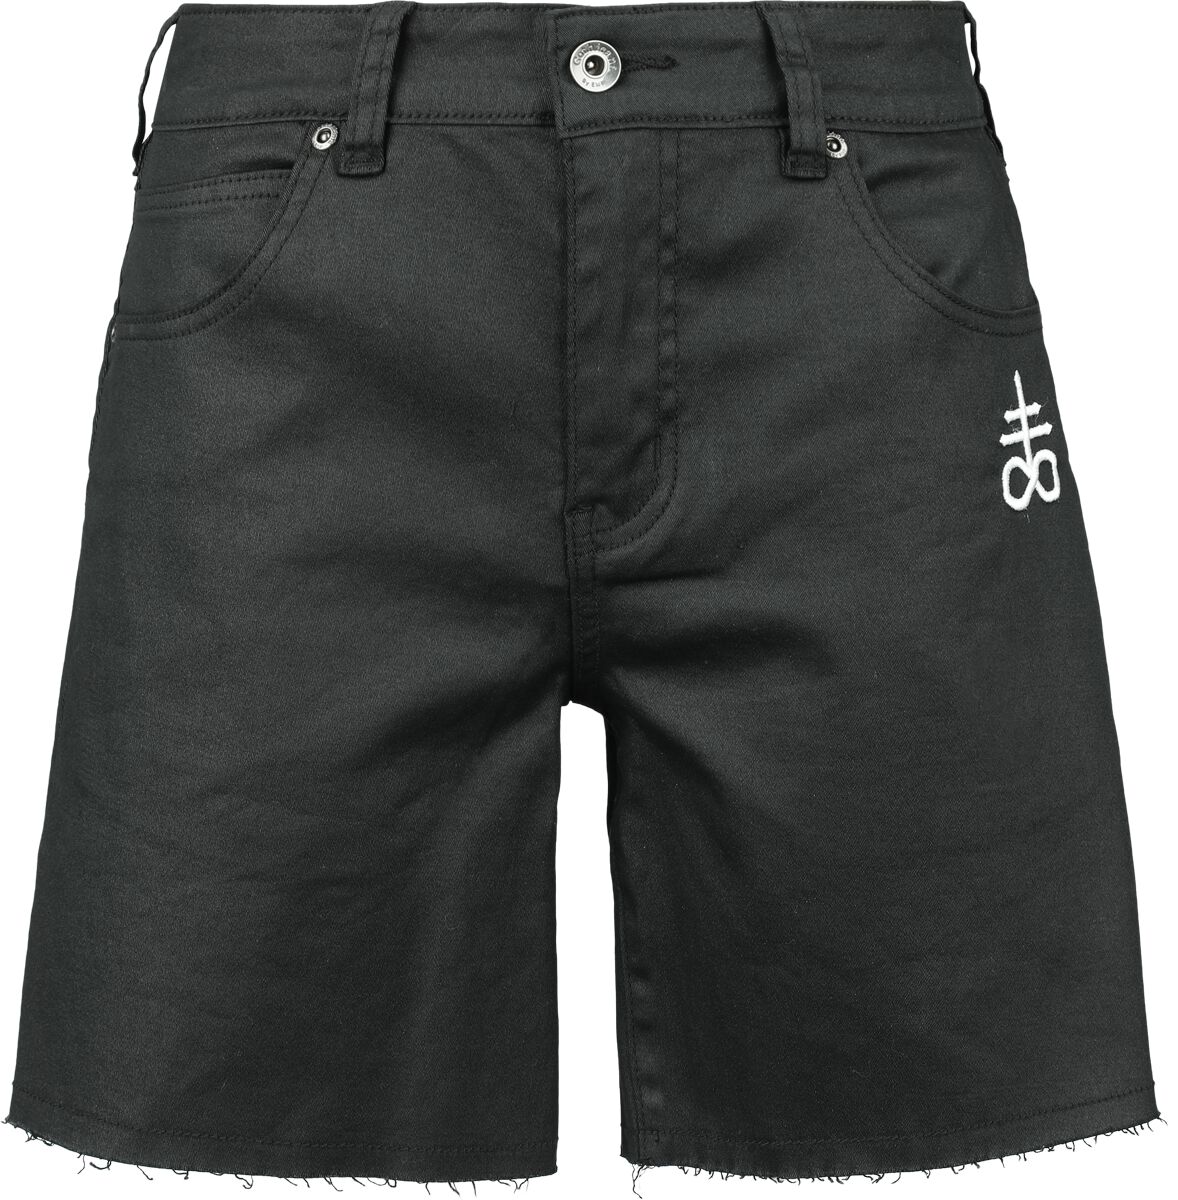 Black Blood by Gothicana Coated Shorts with Small Embroidery Short schwarz in 27